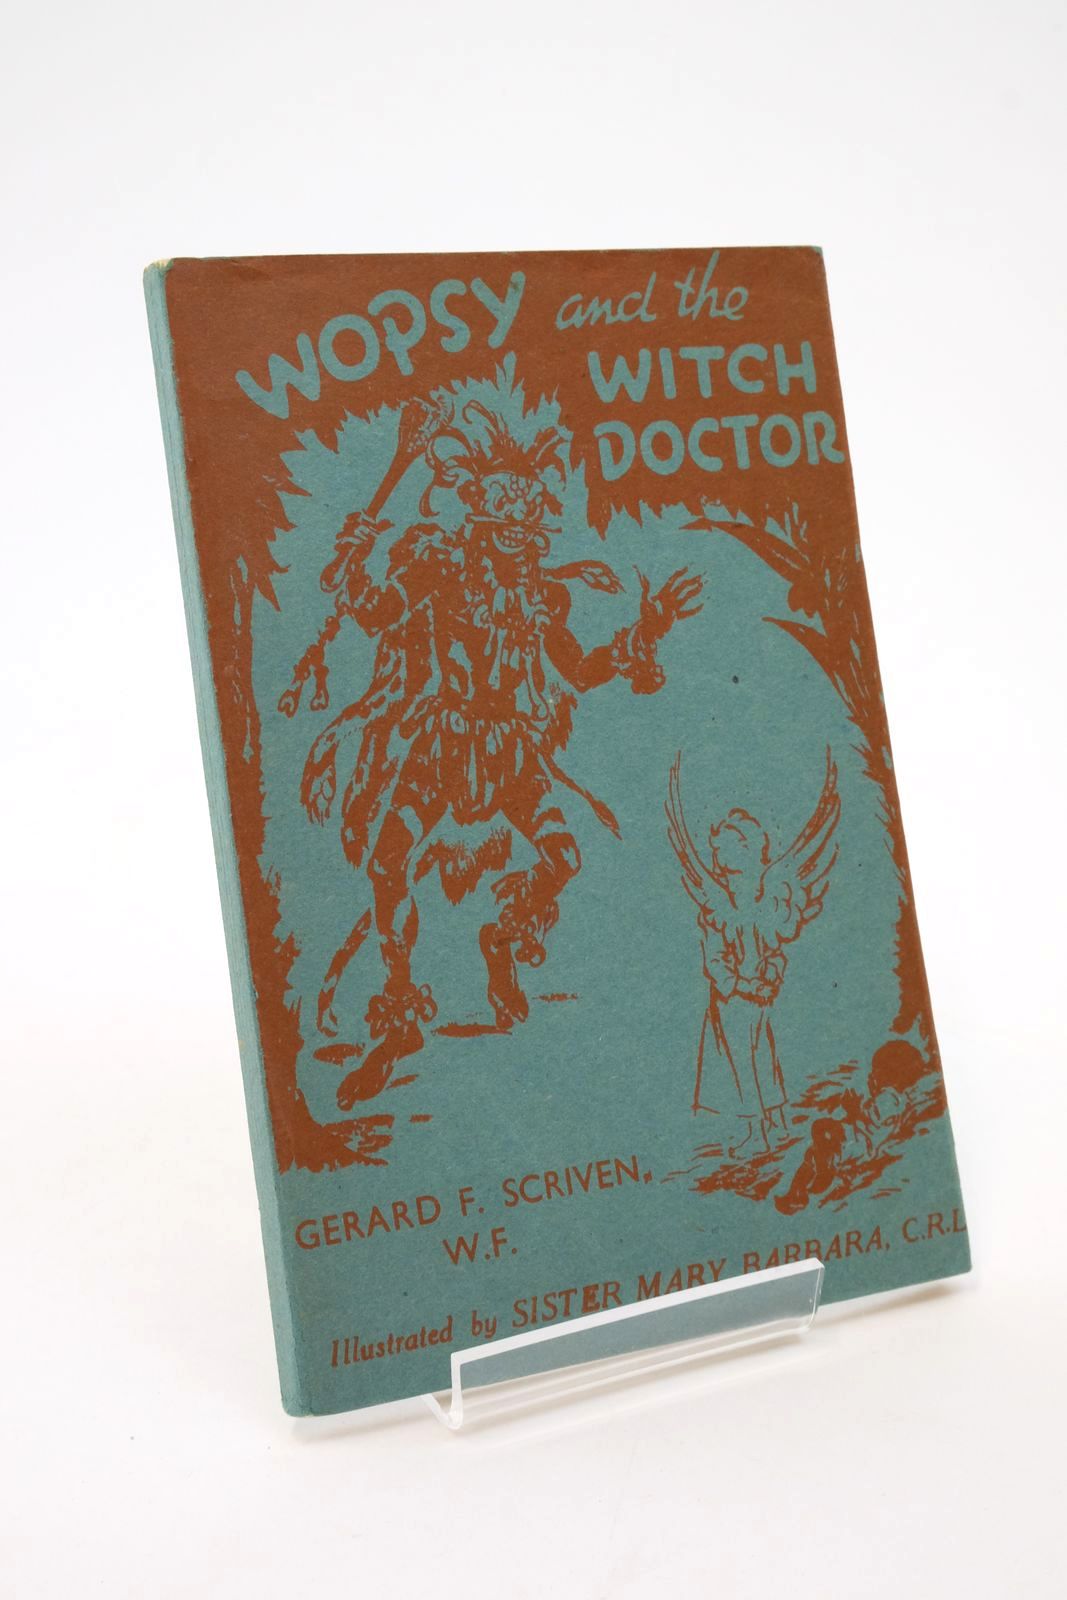 Photo of WOPSY AND THE WITCH DOCTOR- Stock Number: 1322665